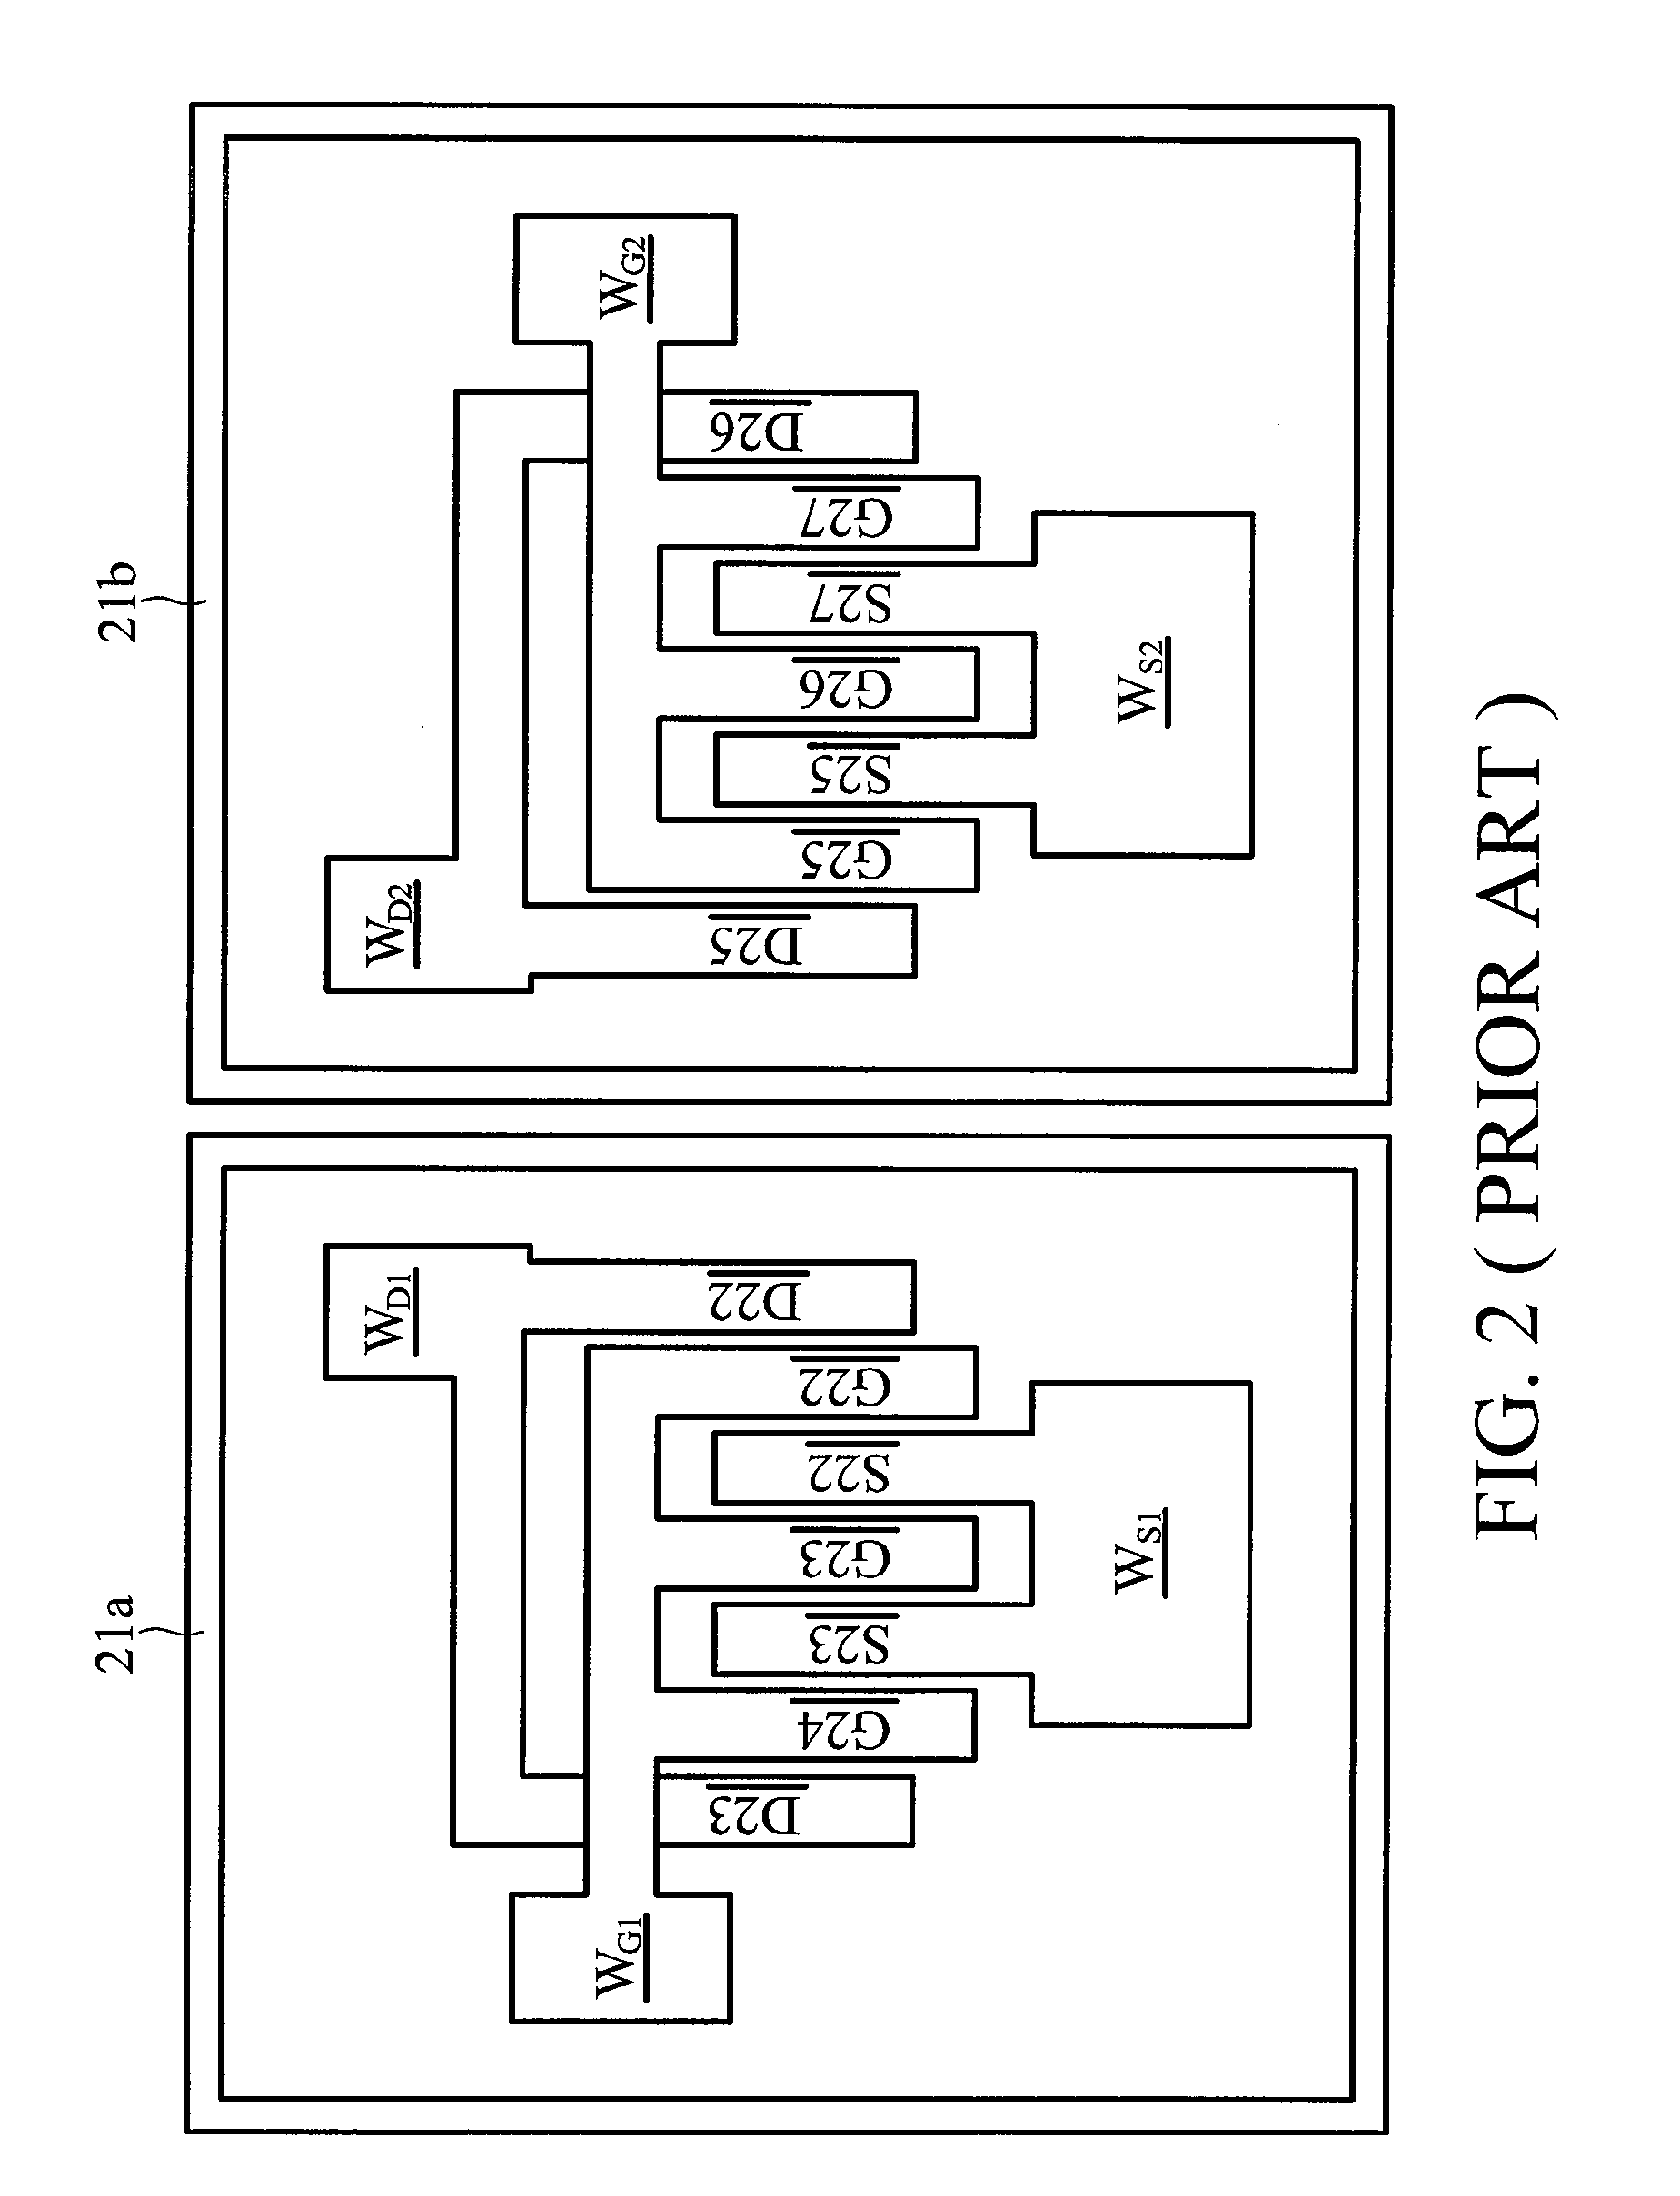 RF integrated circuit device